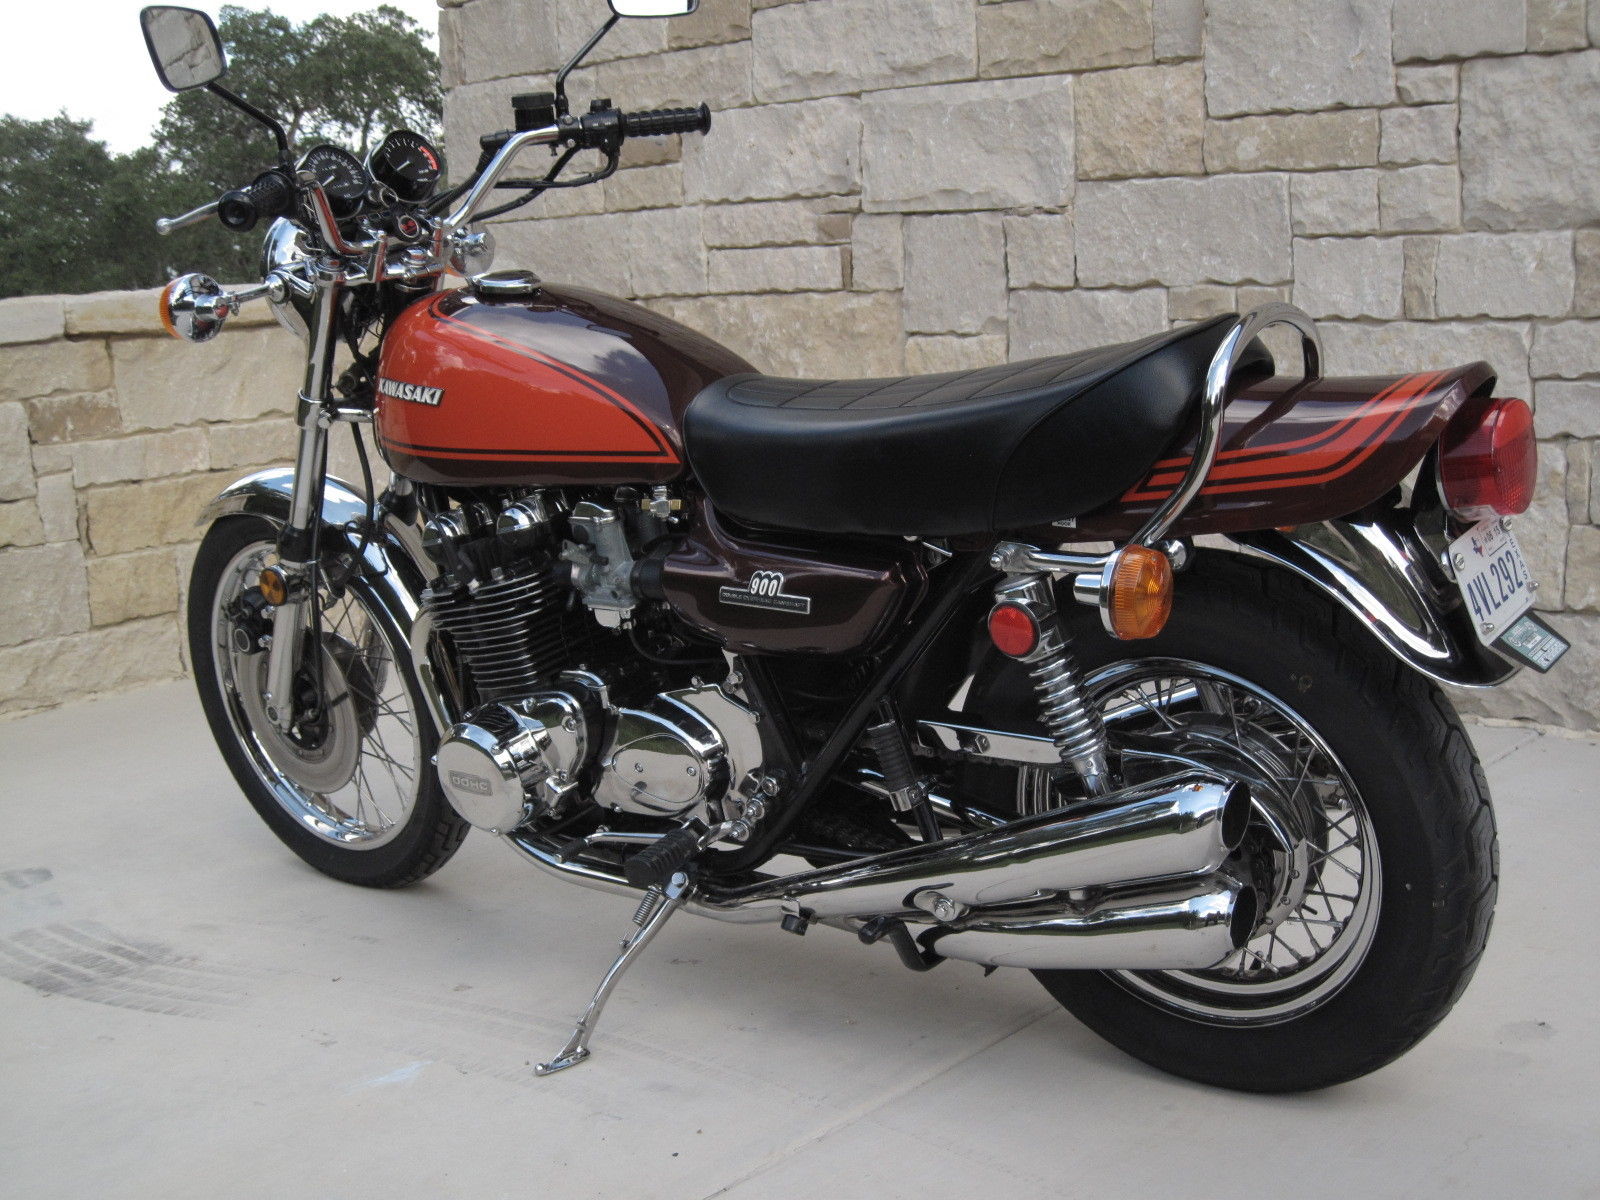 Kawasaki Z1 - 1973 - Frame, Fuel Tank and Exhaust System.